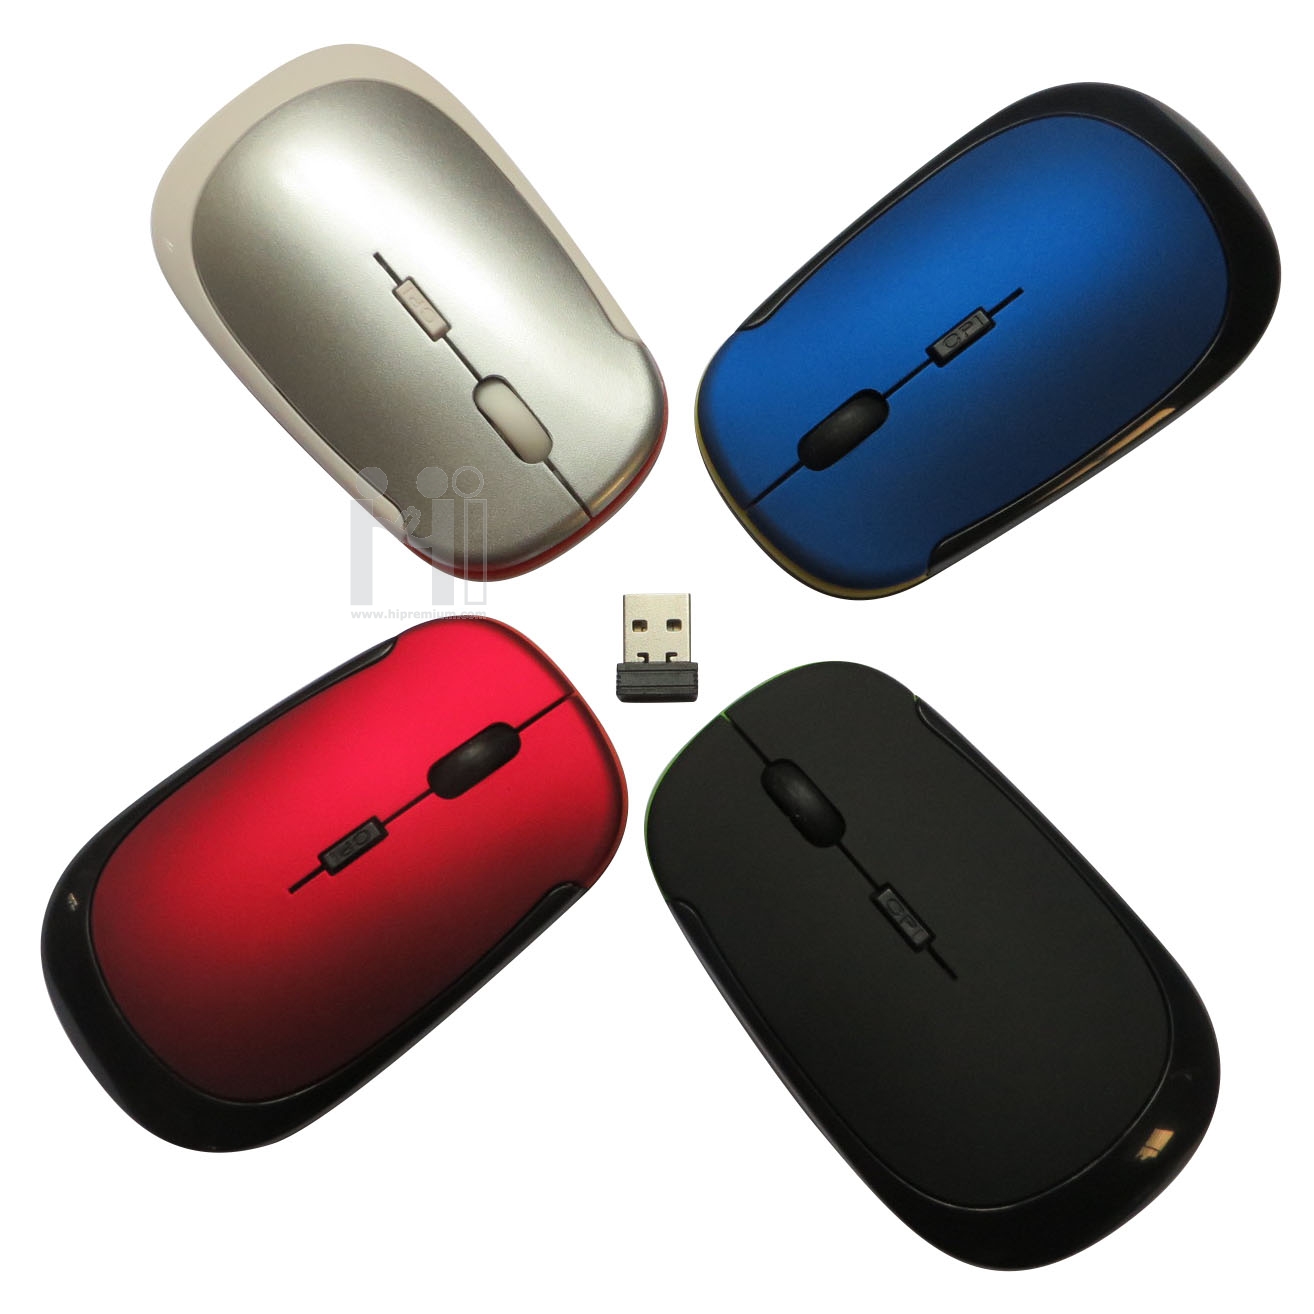  USB Wireless mouse